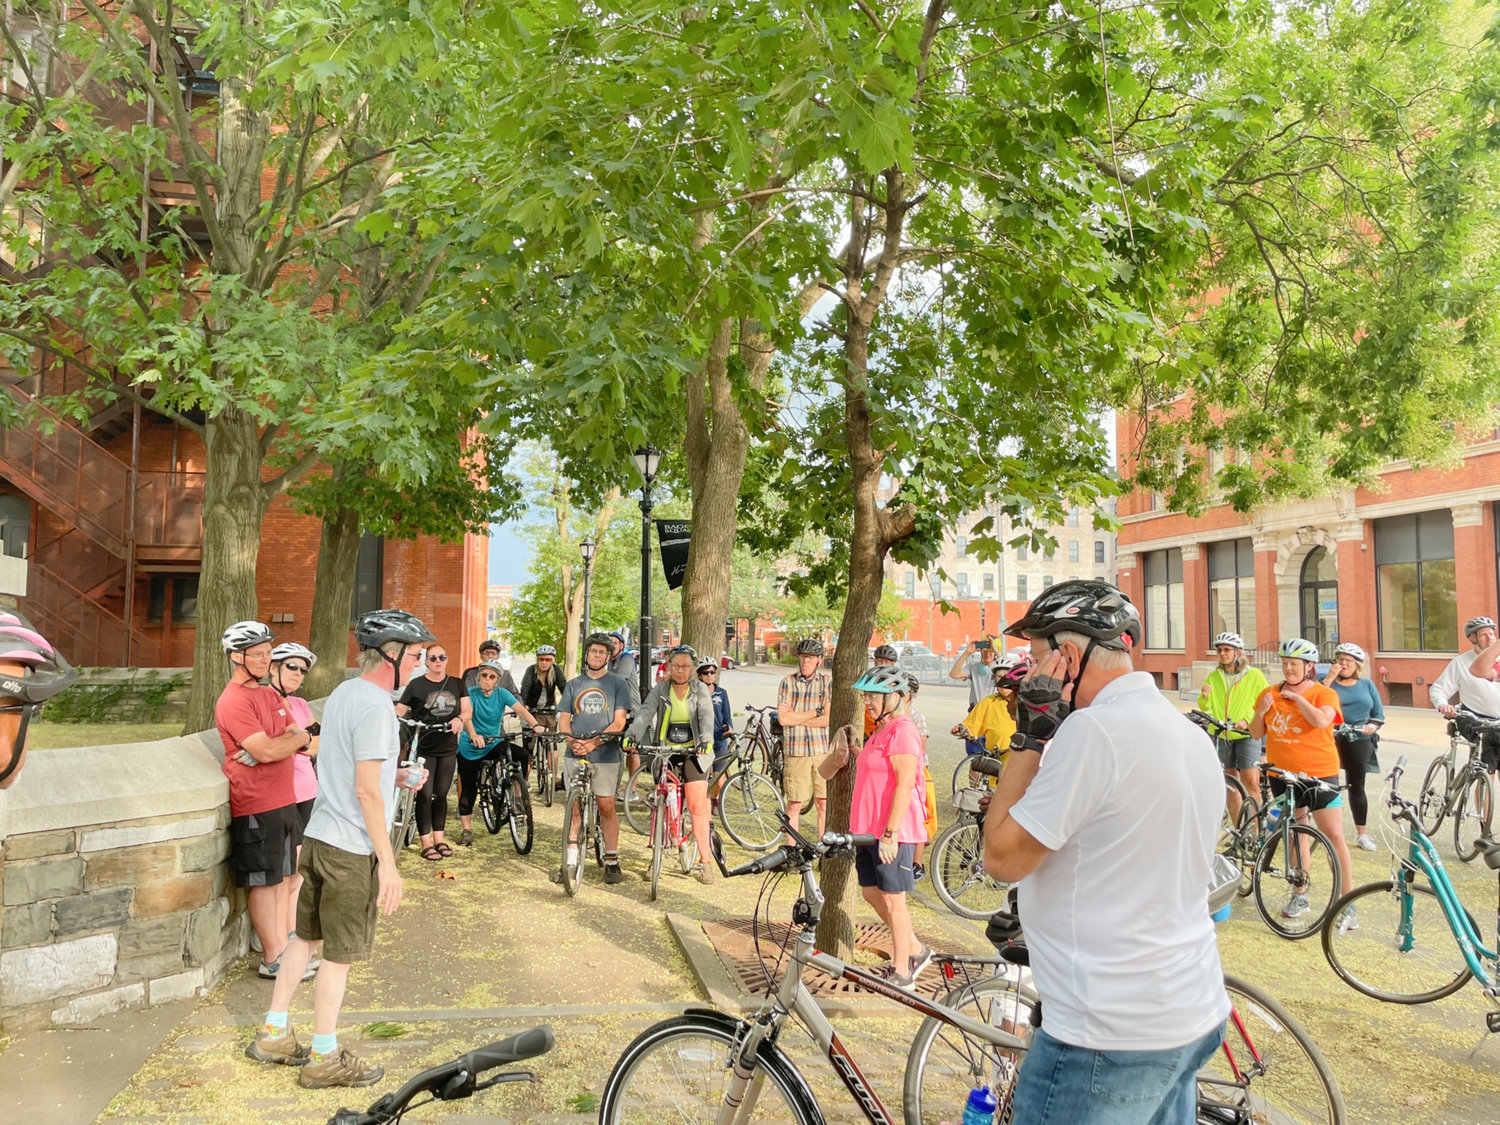 The public is invited to Tuesdays on the Towpath in Utica, where all manner of topics will be discussed along the Erie Canal while biking its trails on Tuesday, Sept. 6. Pictured is the Oneida County History Center’s Tuesdays on the Towpath 2021 ride.